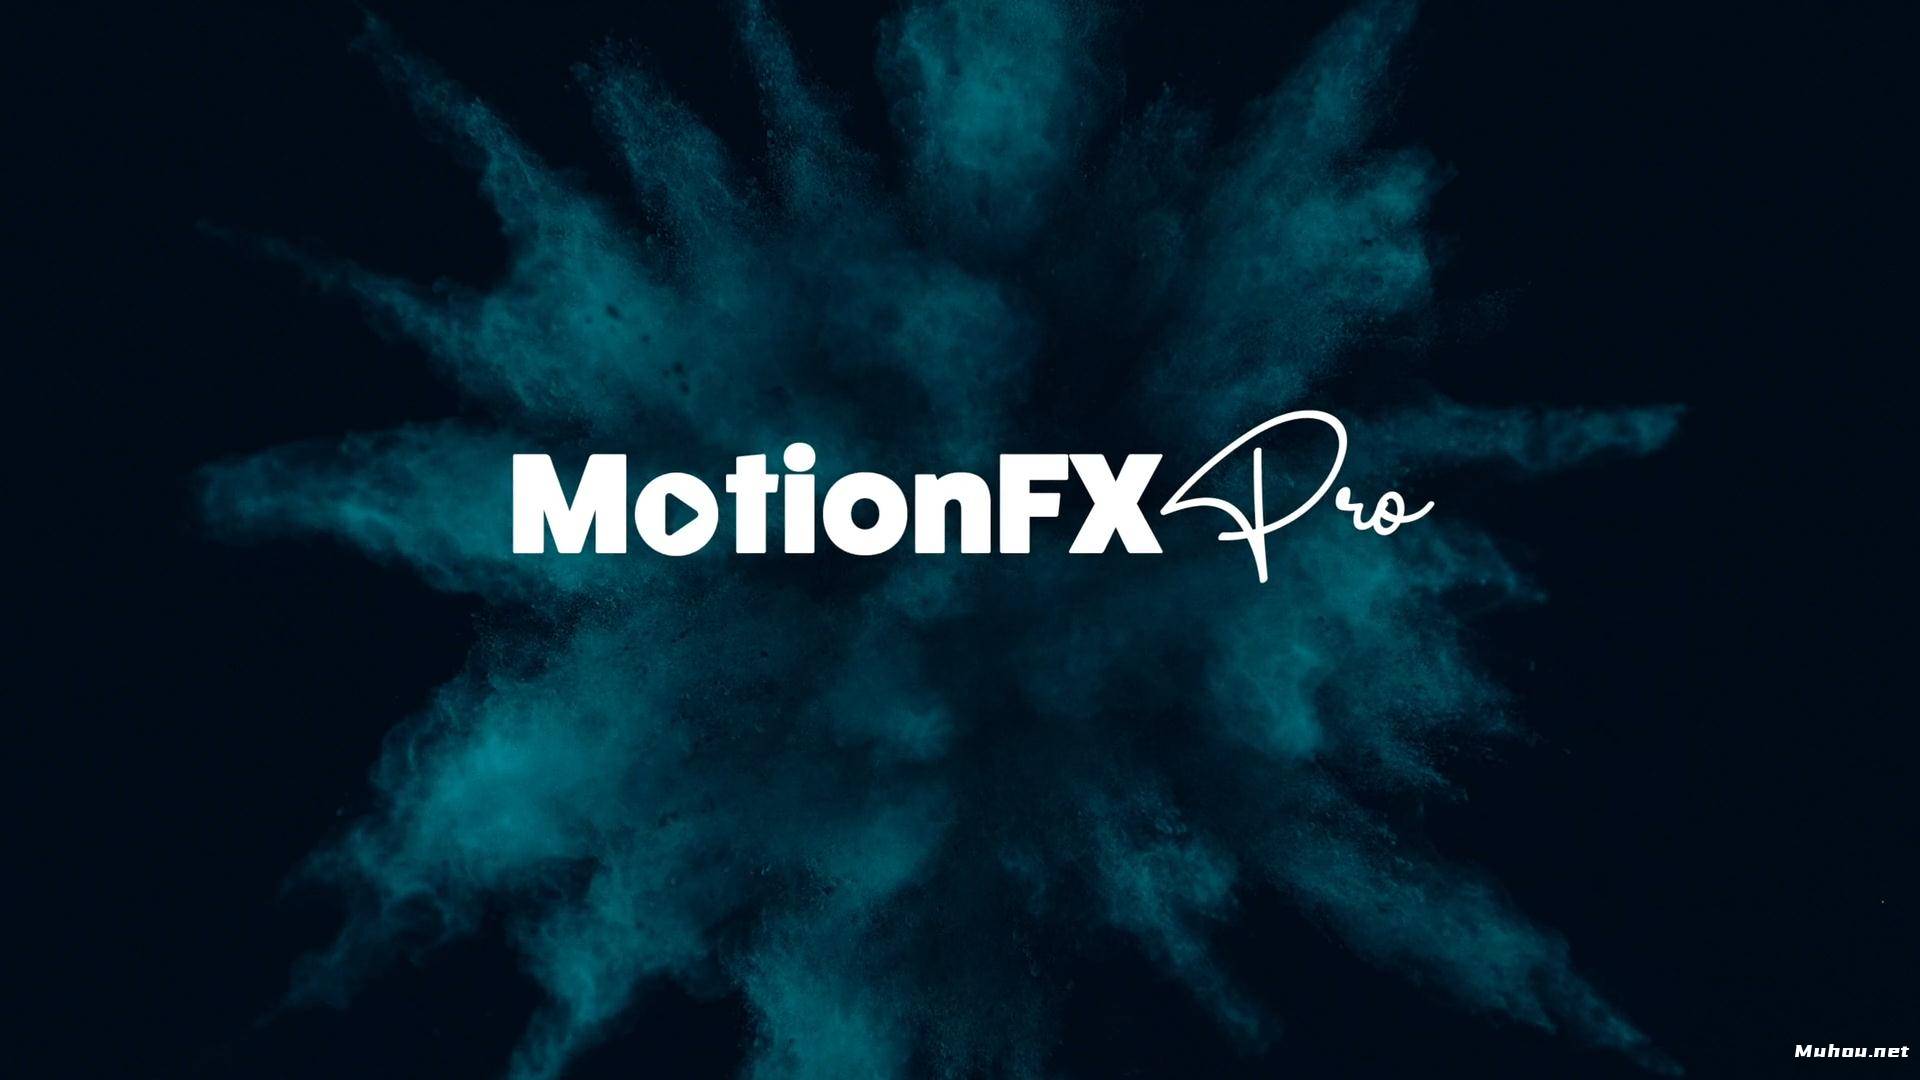 After Effects制作吸引力十足视频效果完整课程视频教程（英文）MotionFX Pro -After Effects Video Effects Course